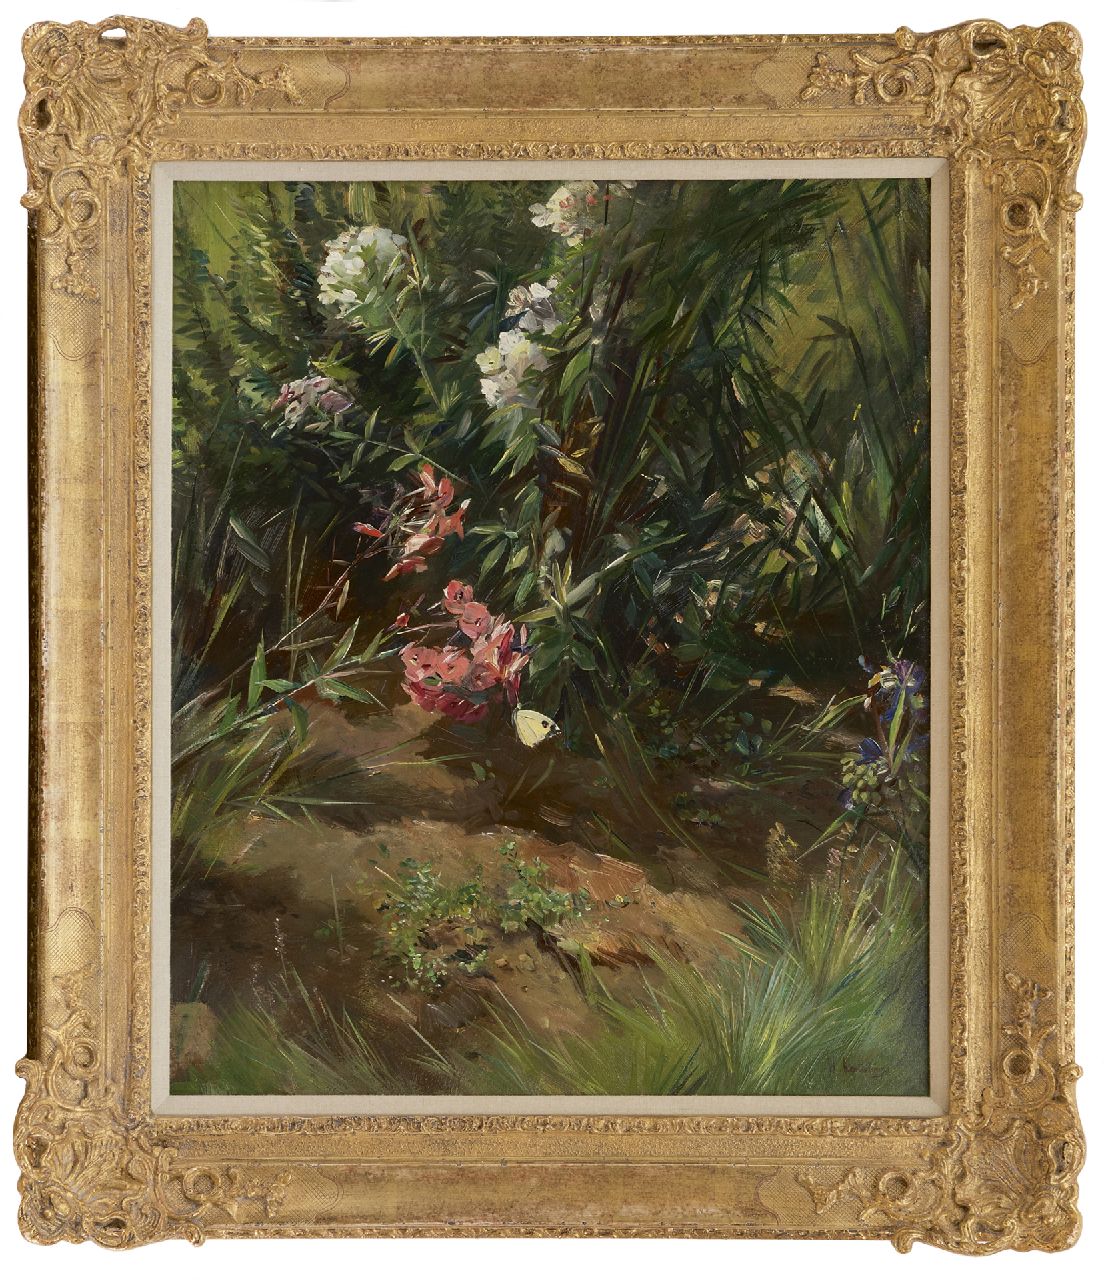 Korteling W.  | Willem Korteling | Paintings offered for sale | Flowering shrubs with a butterfly, oil on canvas 60.2 x 50.2 cm, signed l.r.